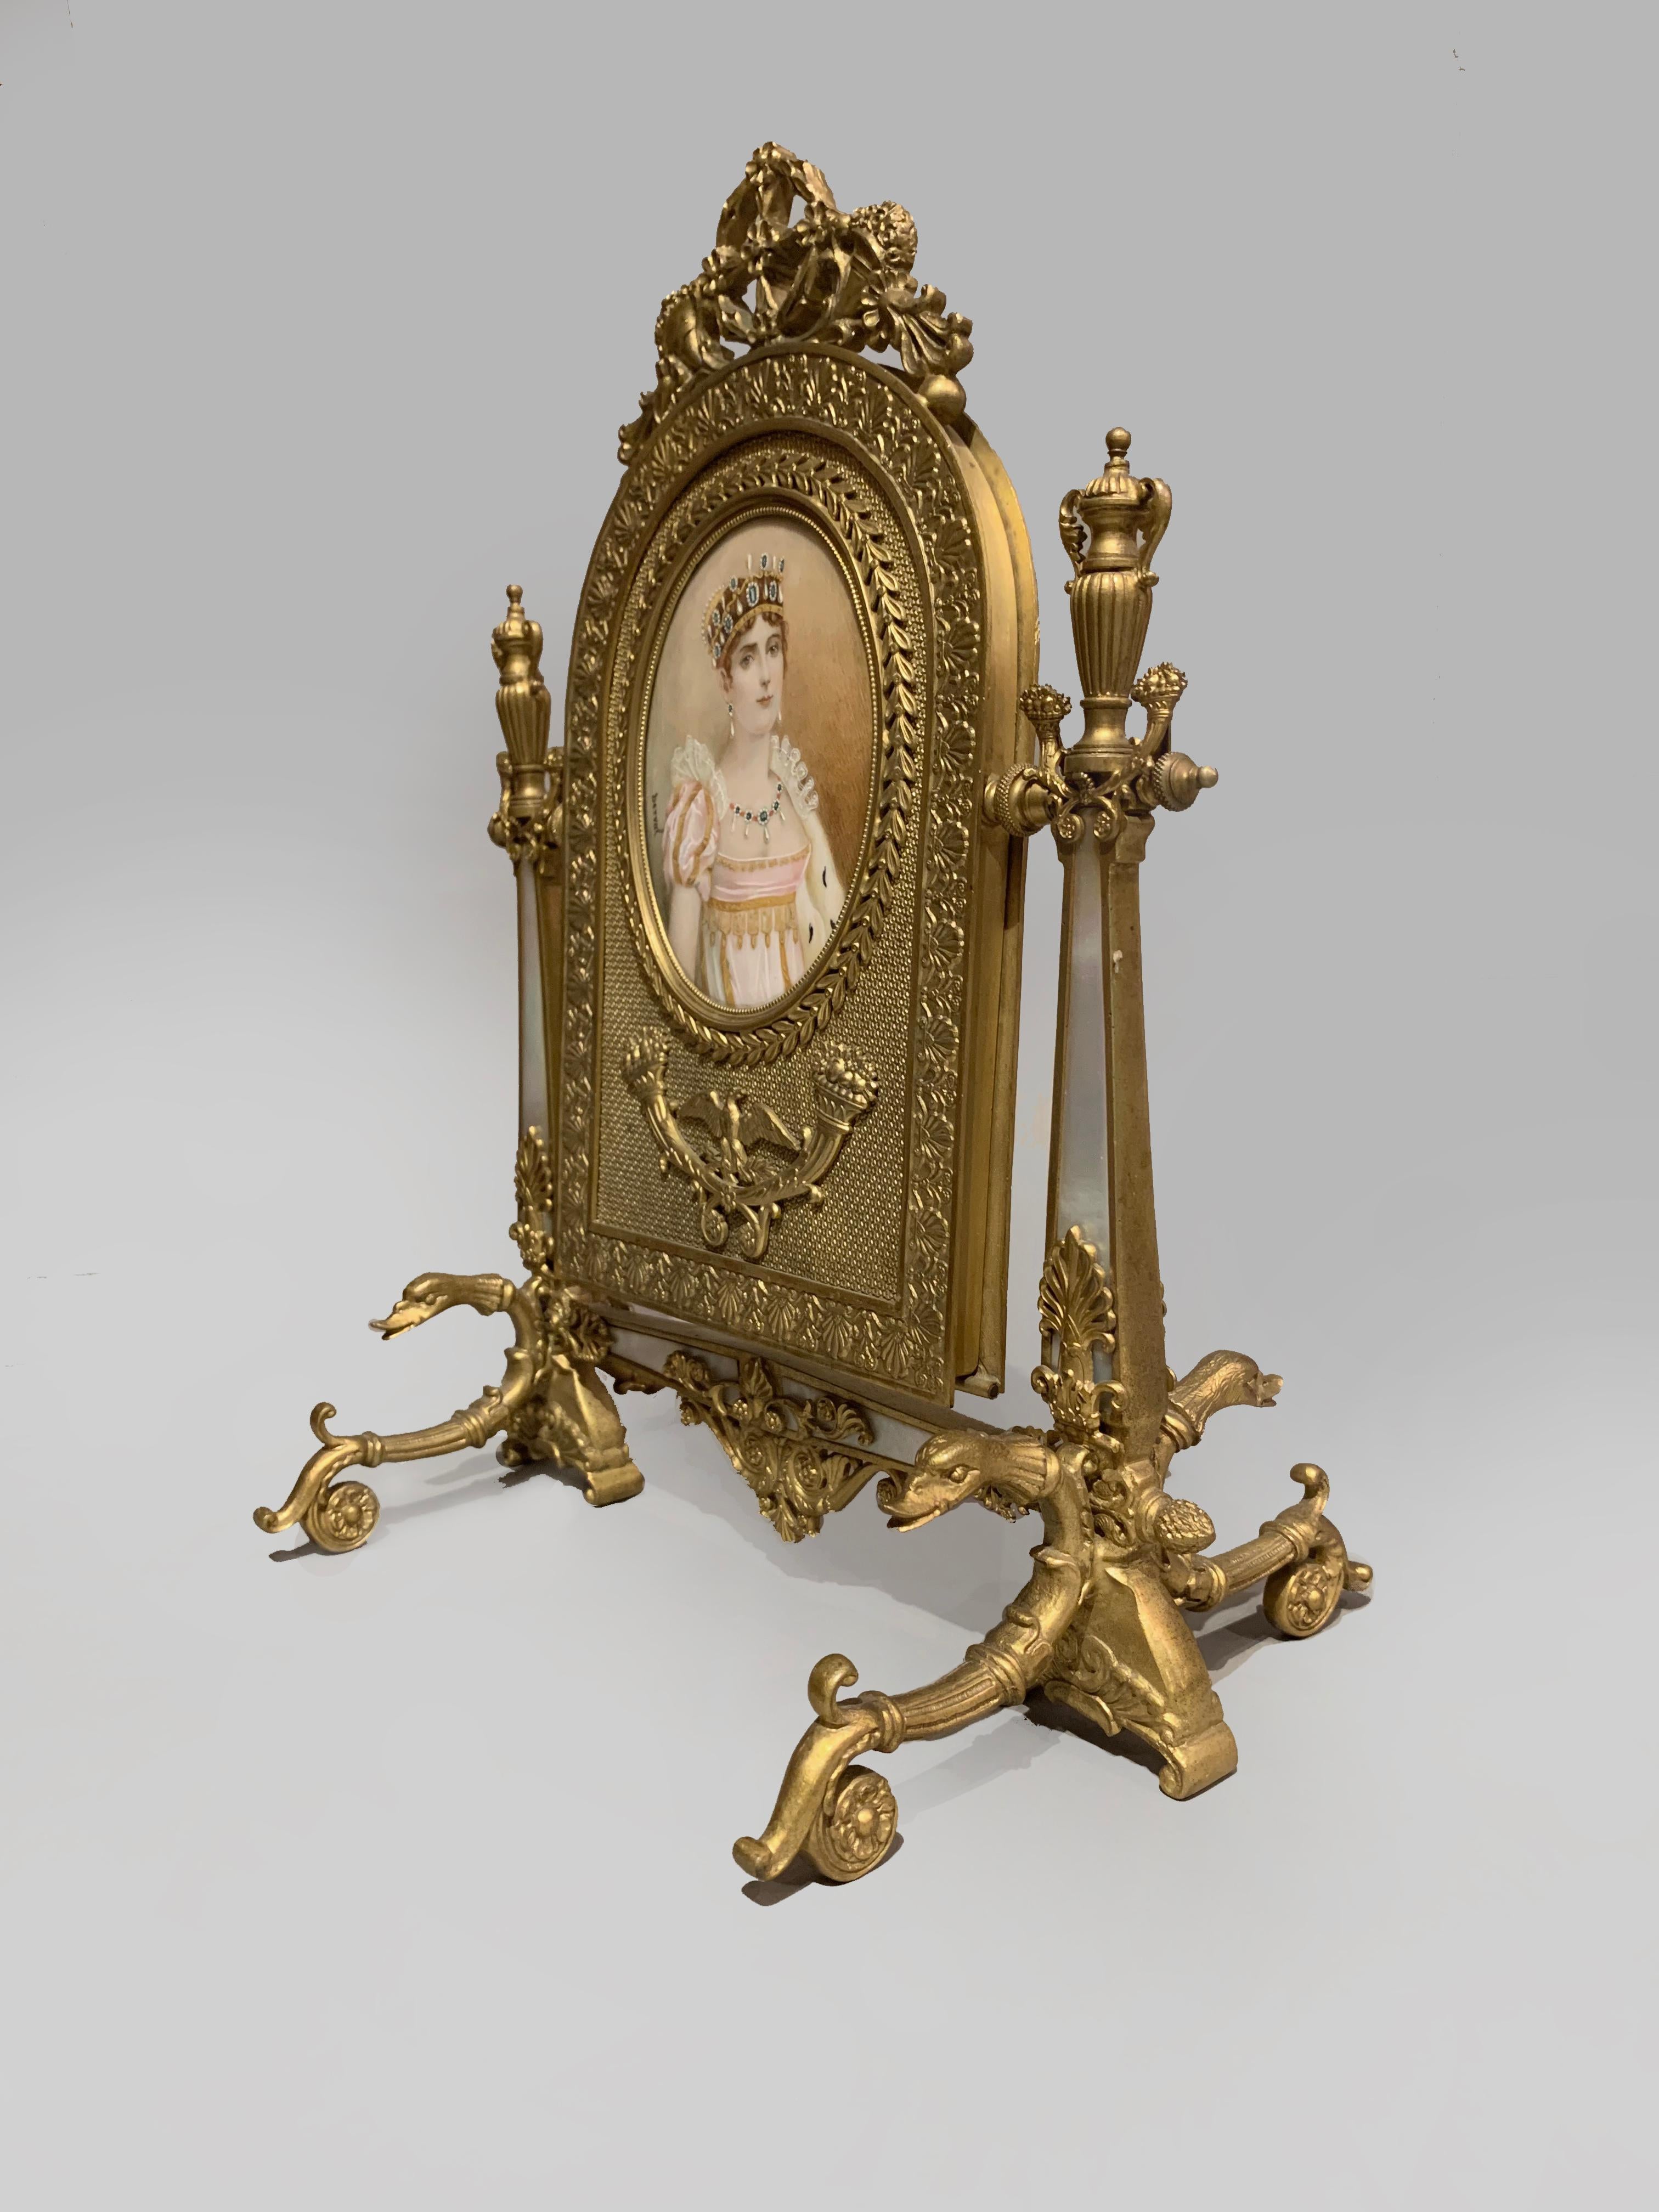 A Palais Royal gilt bronze and mother of pearl toilet mirror.

French, circa 1850.

A Palais Royal gilt bronze and mother of pearl toilet mirror, of Second Empire design with arched bevelled glass plate and inset with a portrait miniature of an